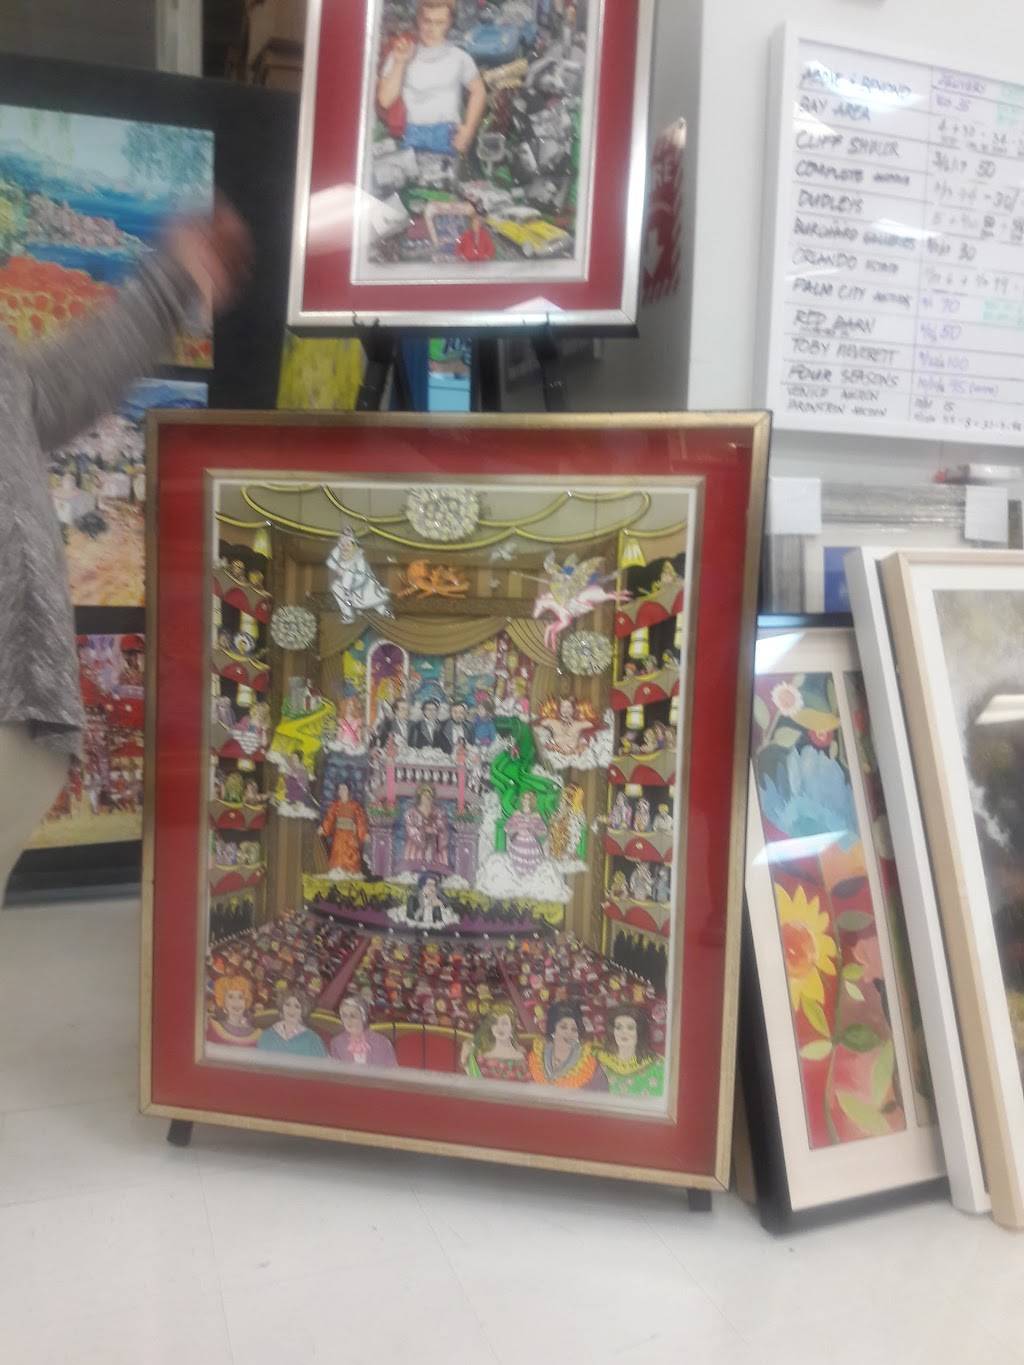 Baterbys art and framing | 2054 State Road 436 N, suite 108 -112, Winter Park, FL 32792, United States | Phone: (888) 682-9995